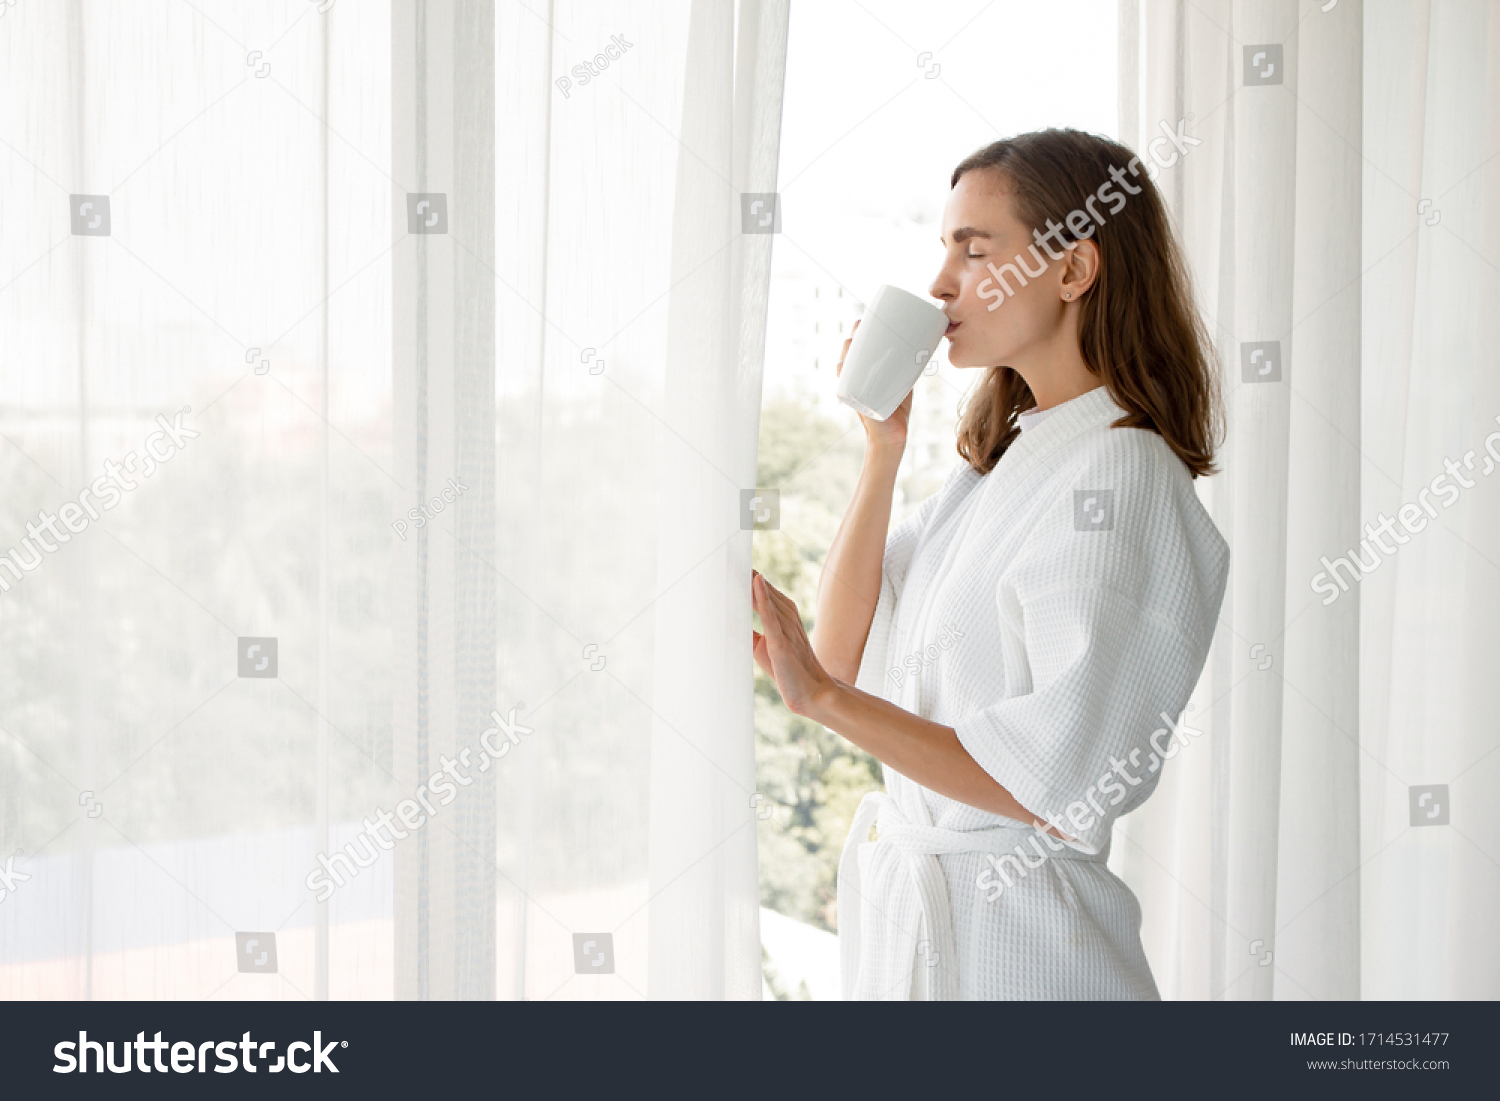 Beautiful Young Caucasian woman in pajamas holding a glass of white coffee ready to drink by the window in the bedroom at home after wake up in the morning. Woman standing drinking coffee by window. #1714531477